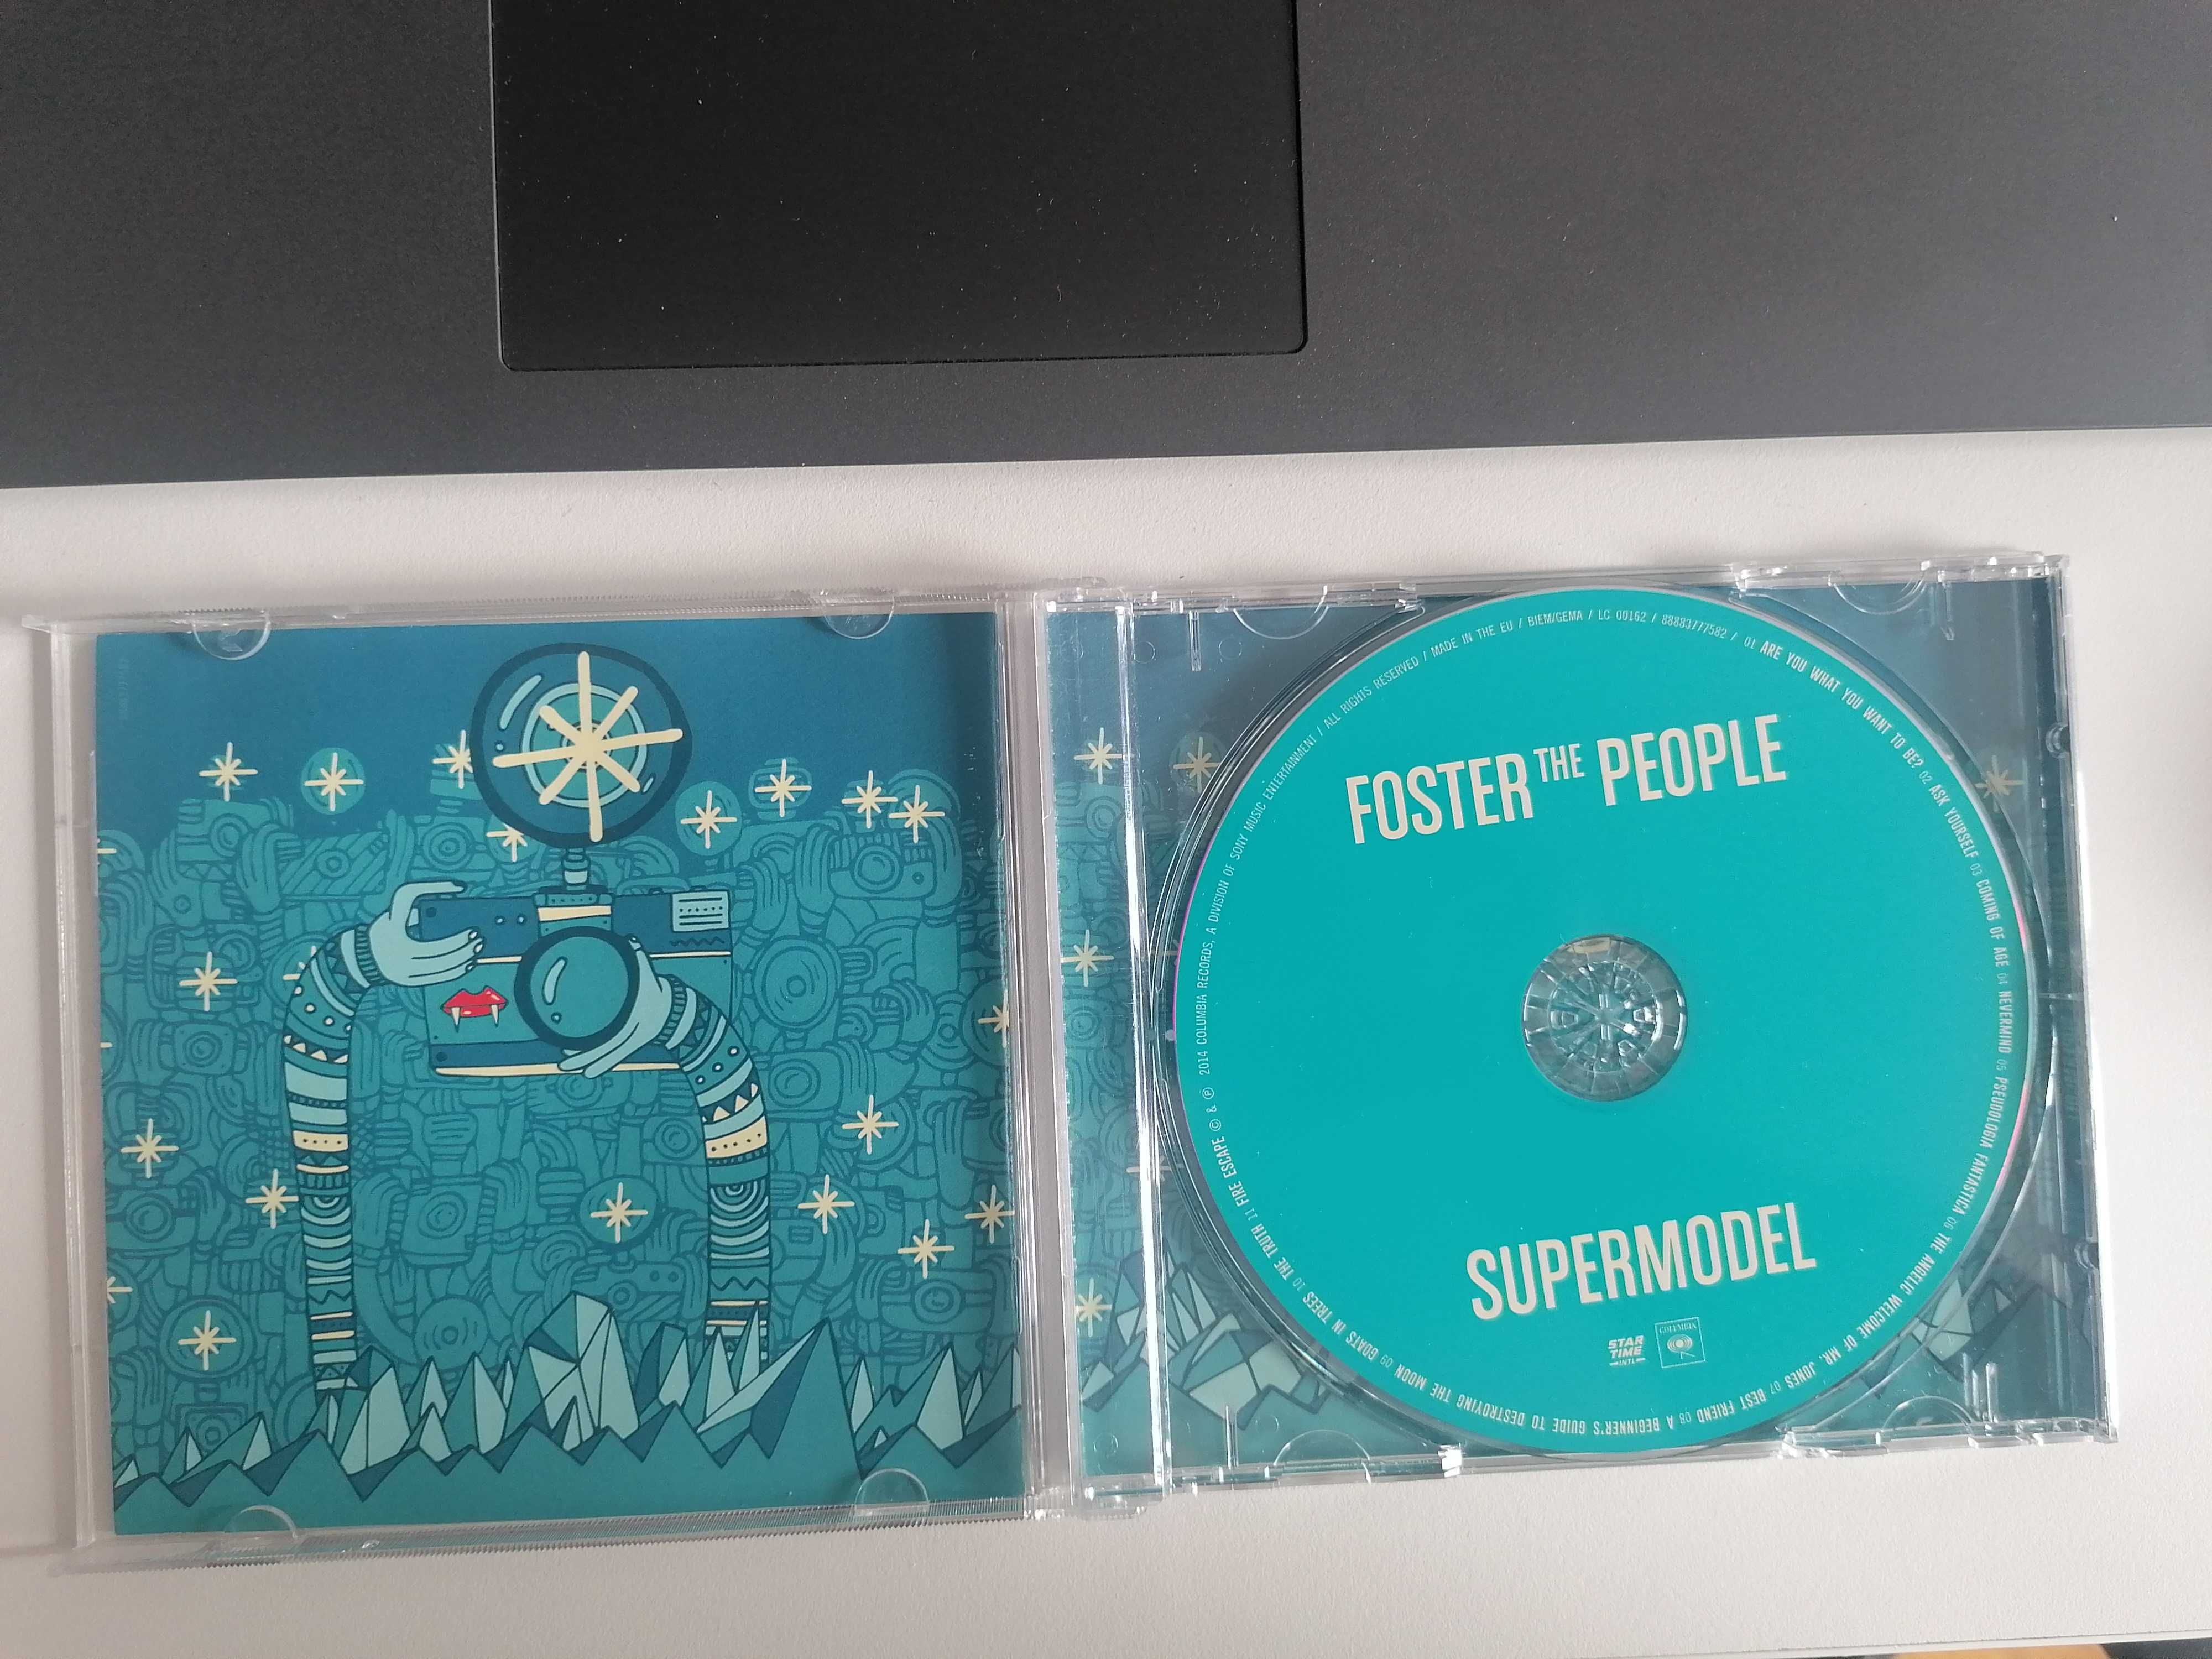 Foster The People. Supermodel. CD.